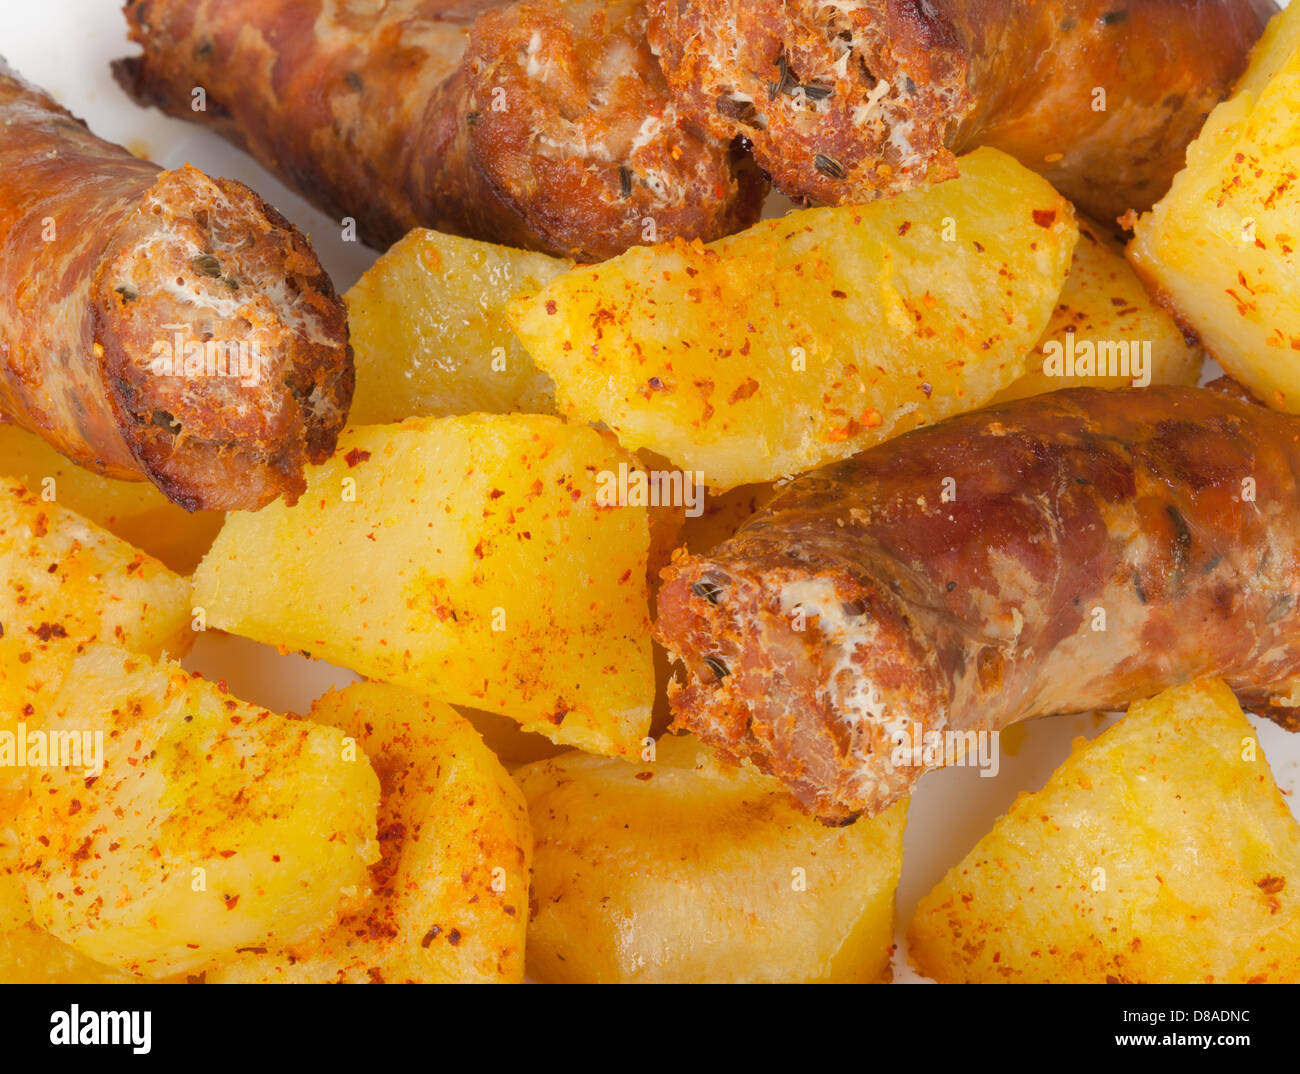 Chicken images photography 36 fast - food - Page nuggets stock hi-res and Alamy